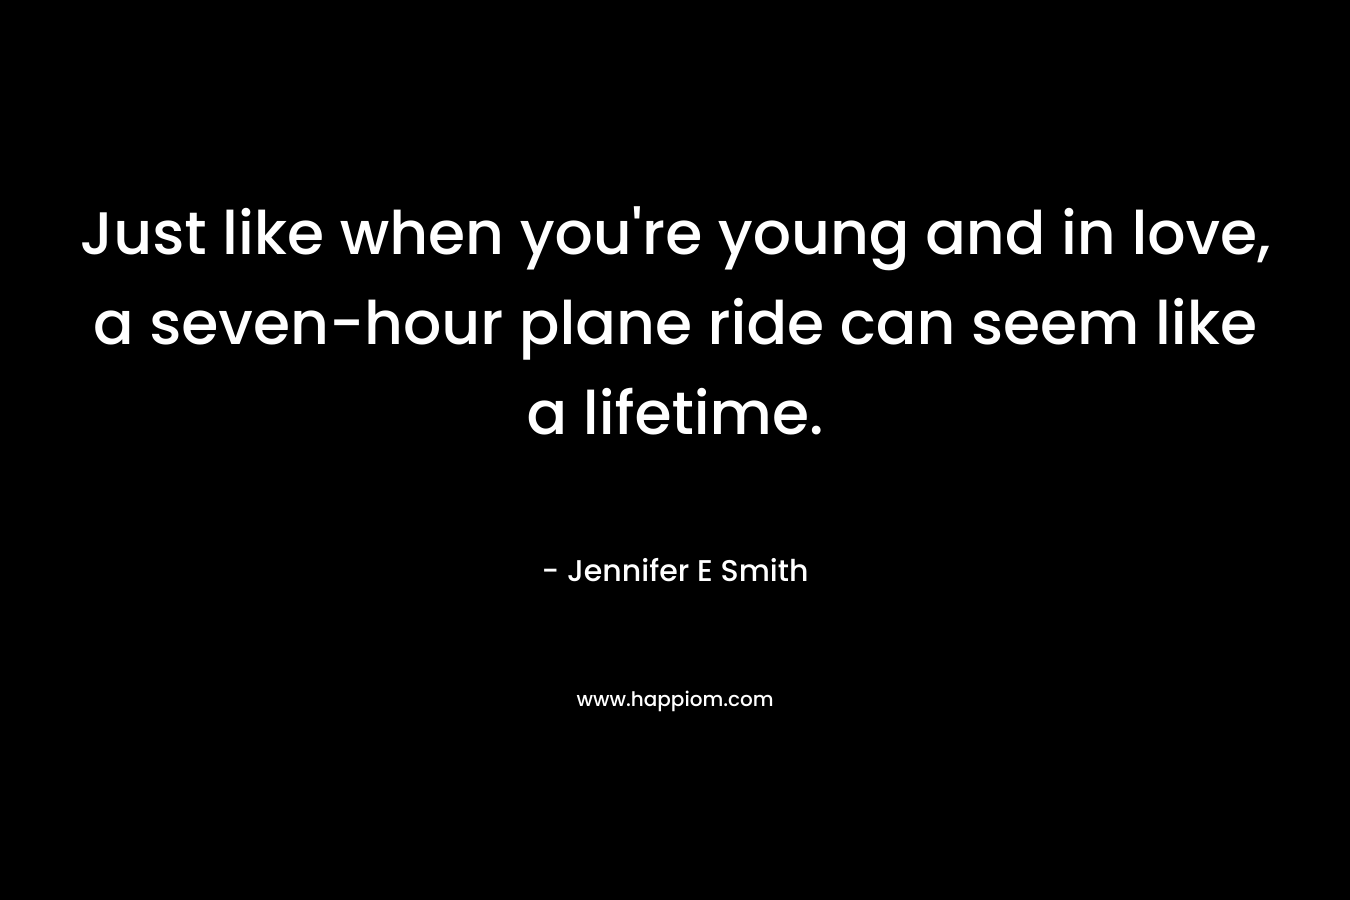 Just like when you're young and in love, a seven-hour plane ride can seem like a lifetime.